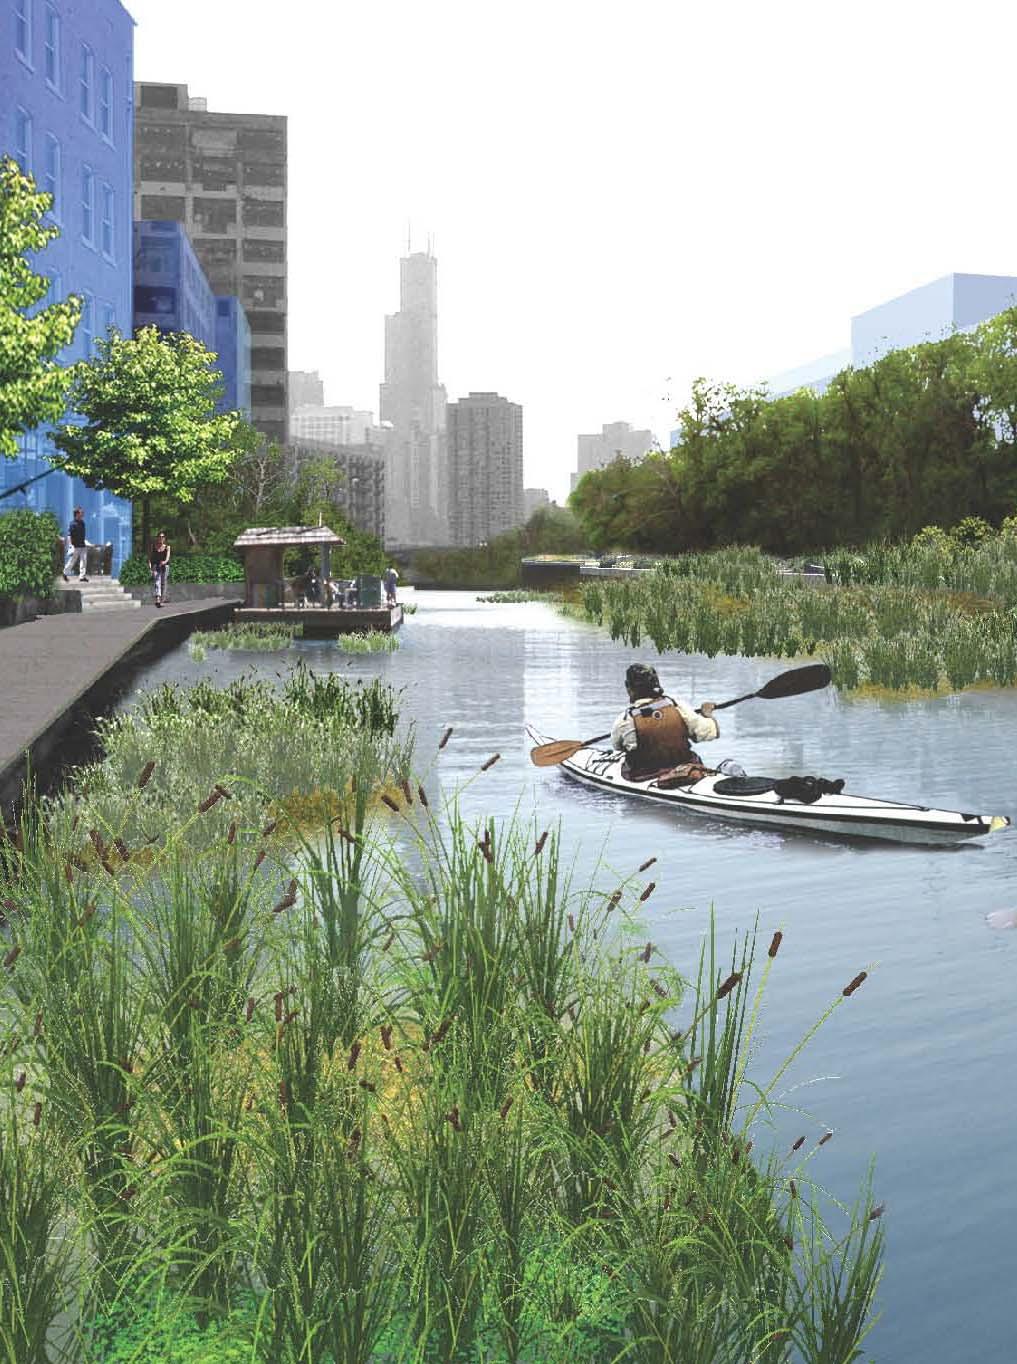 North Branch Riverfront Lake to Halsted City Role: Involves CDWM, CDOT, DZLUP, DCD Timeframe: 2012-2016 Cost Estimate: $75 million Project Description: Develop the North Branch Riverfront with: